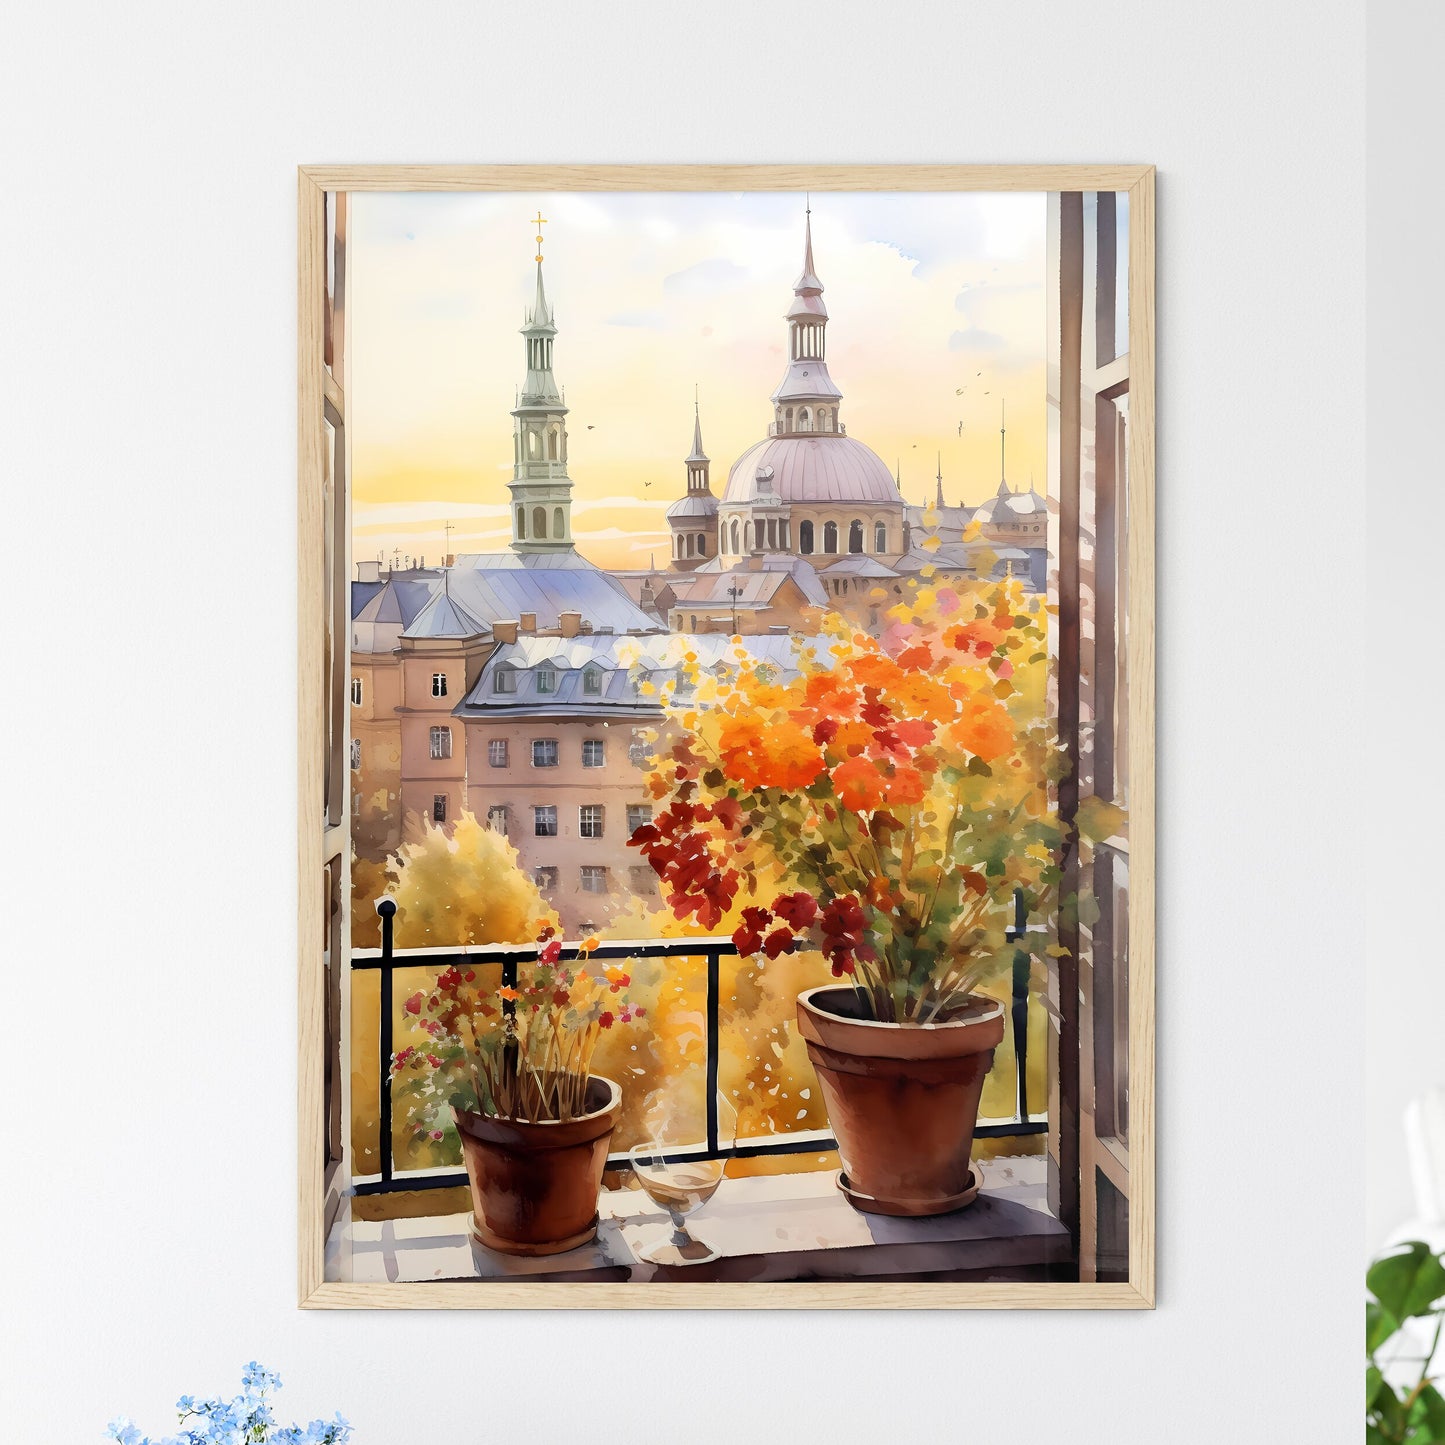 Watercolor Painting Of A Window With A View Of A City And Buildings Art Print Default Title